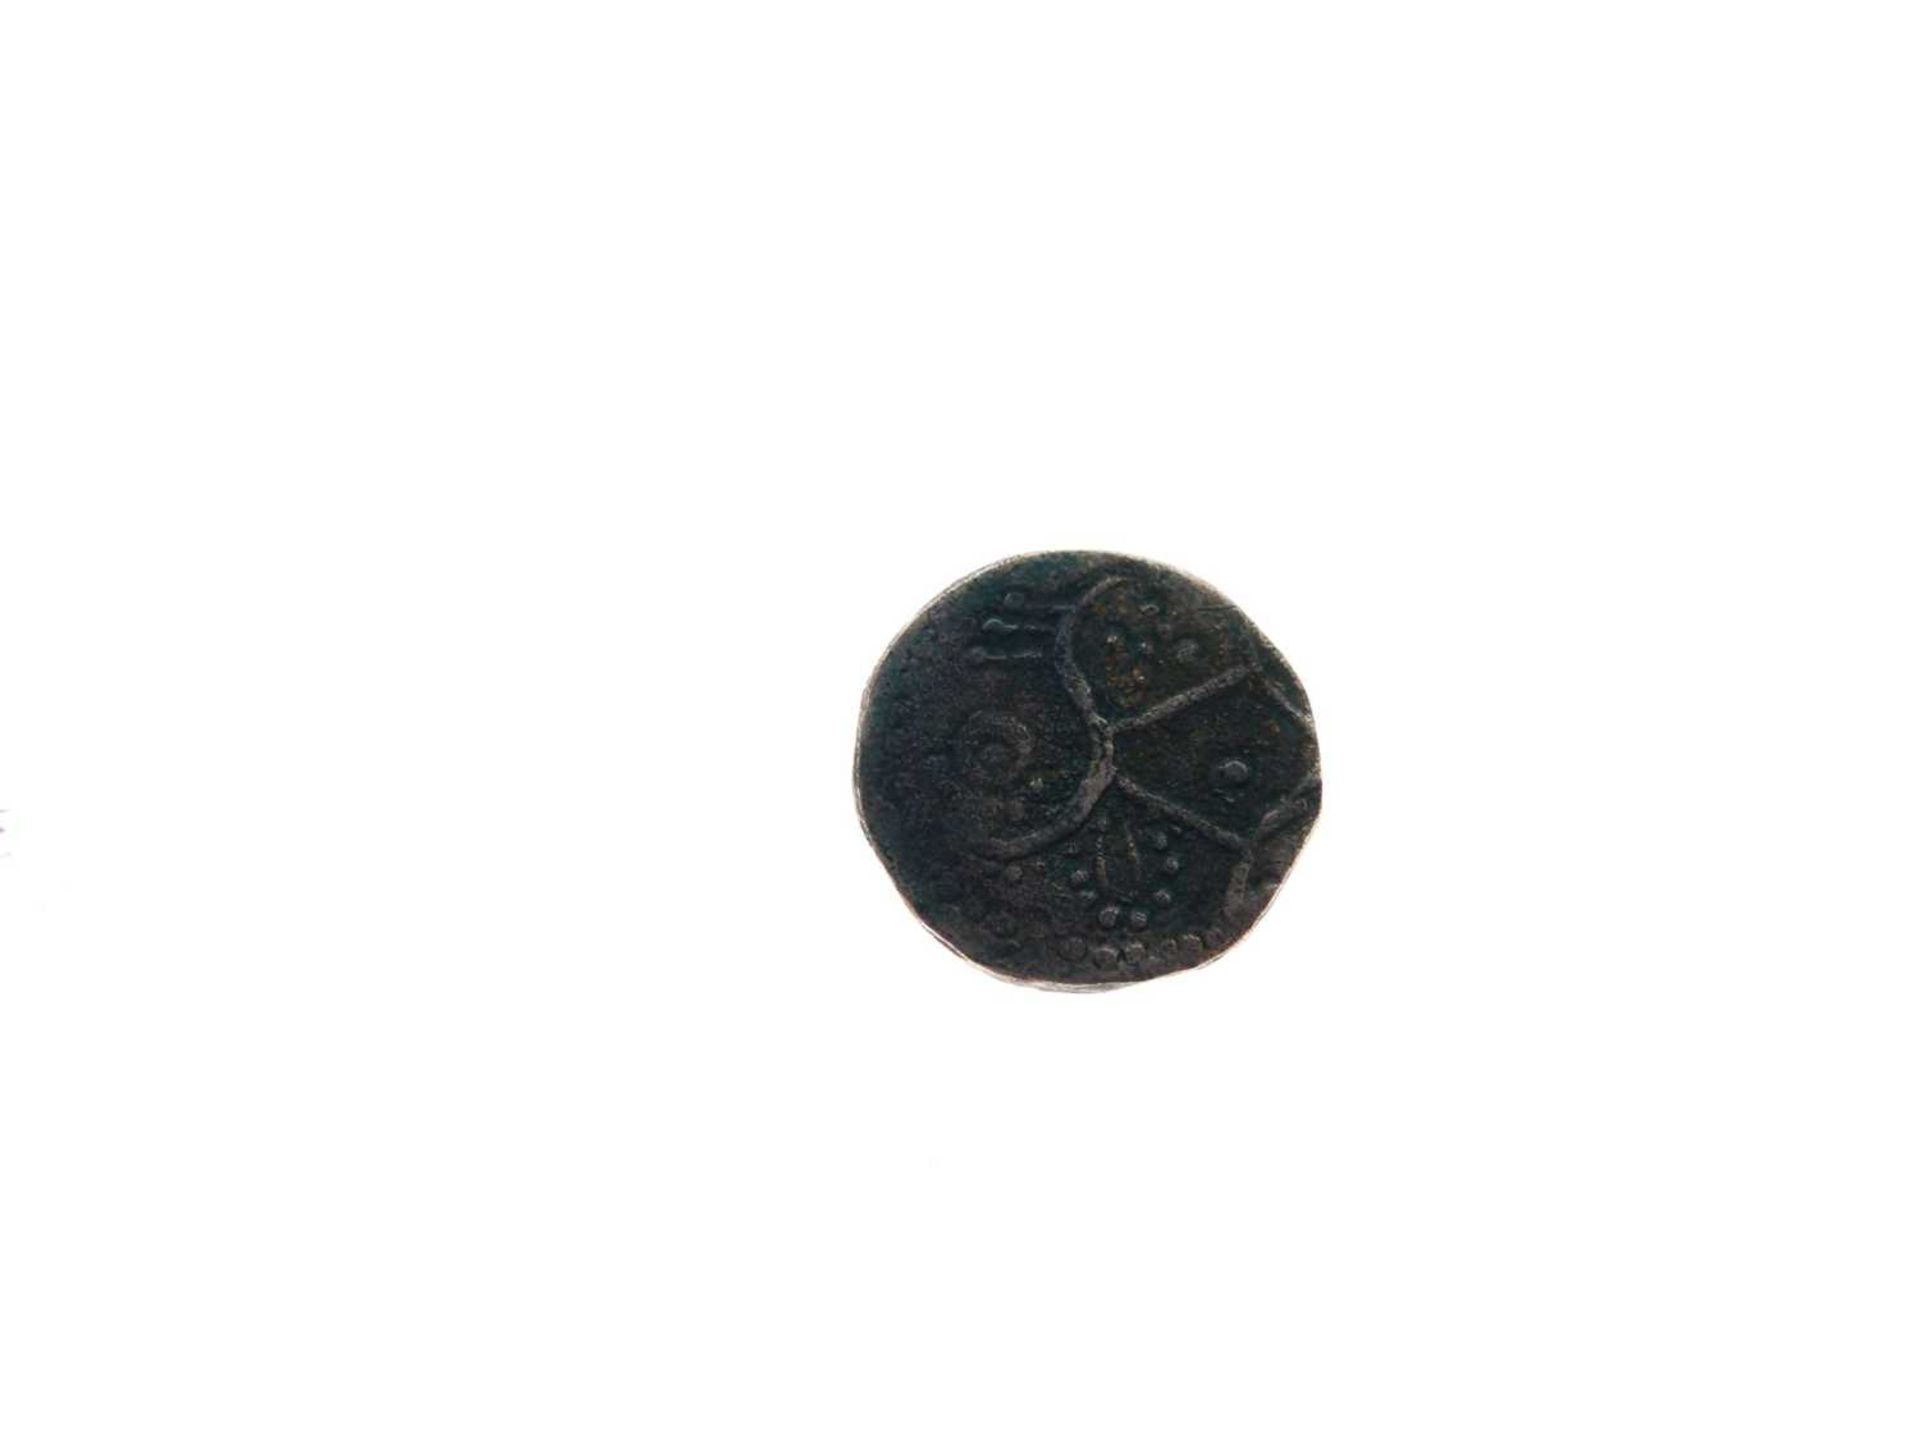 Early Anglo-Saxon Period 'Wodan' head coin - Image 2 of 7